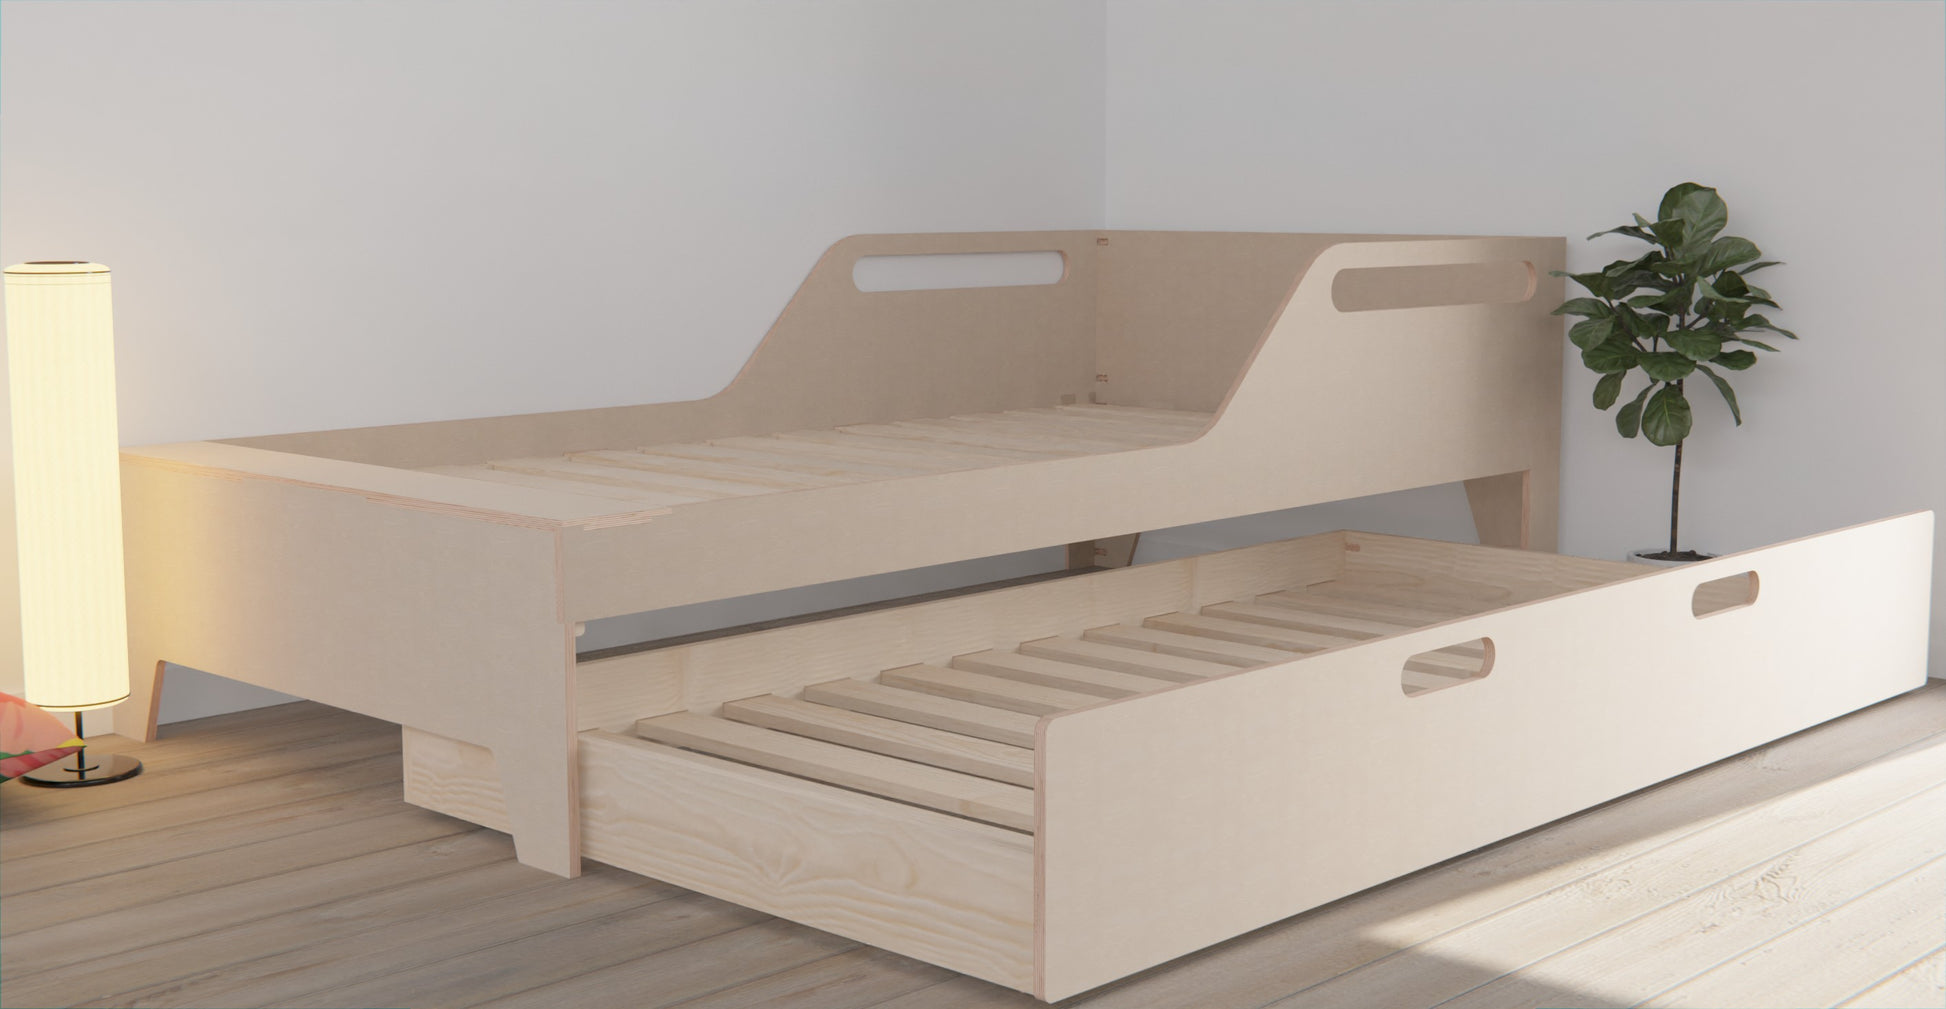 Discover the charm of a wooden bed frame with trundle bed - a space-efficient solution for modern living.